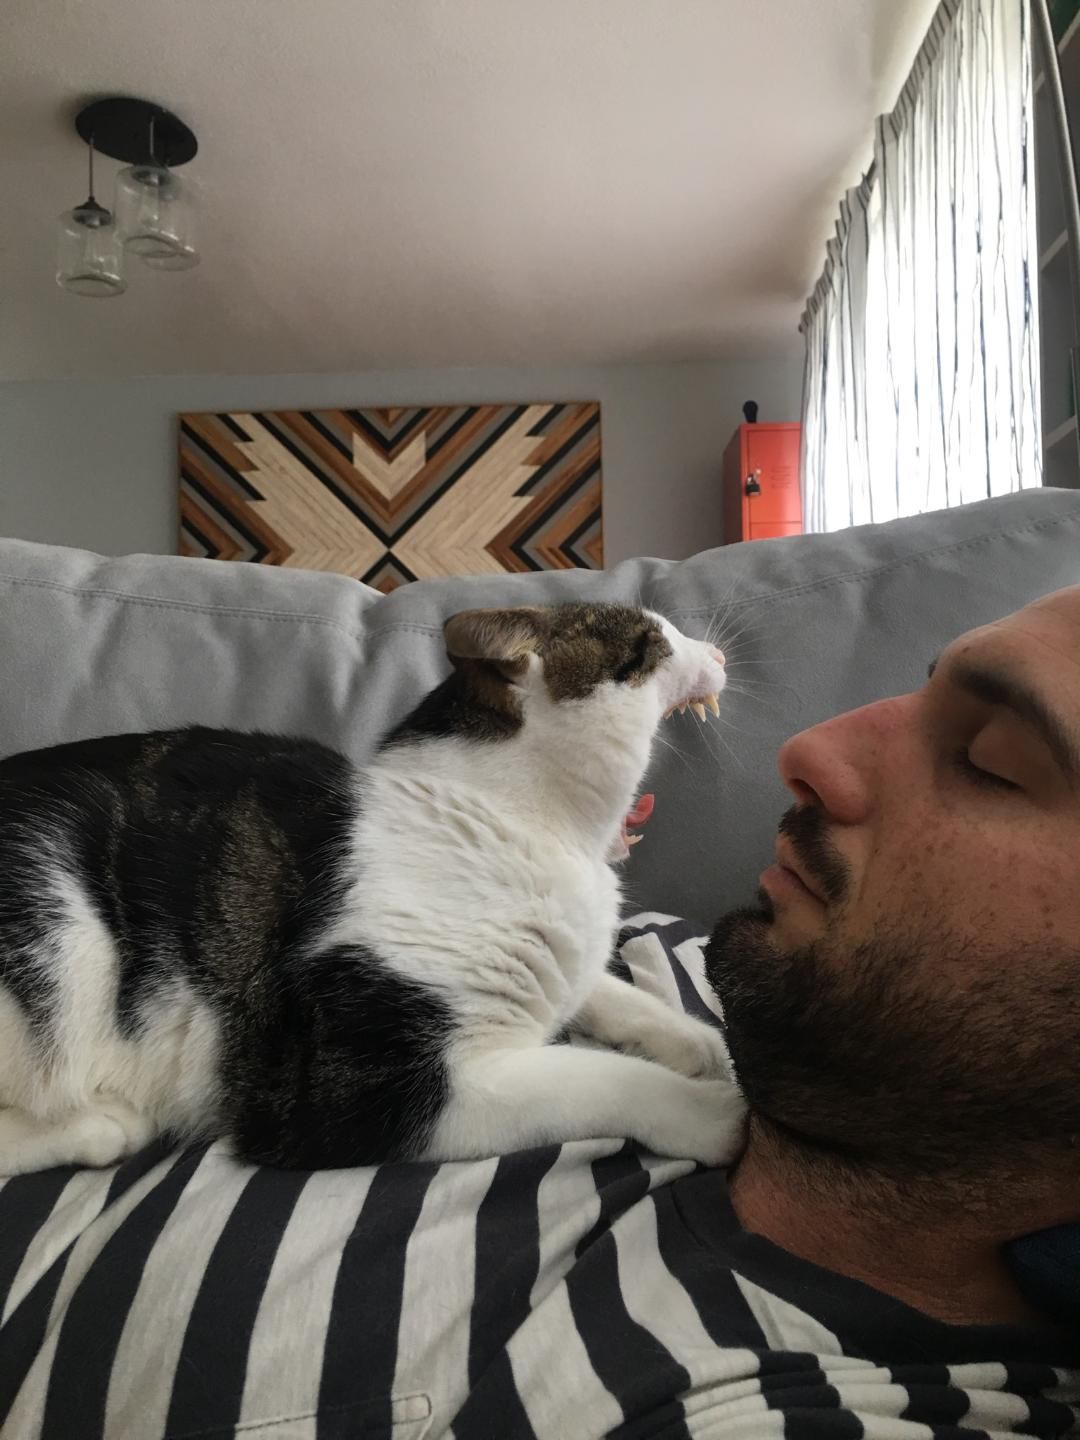 Captured during a rainy day nap, but it looks like Simon the cat is attempting to swallow my fiancé